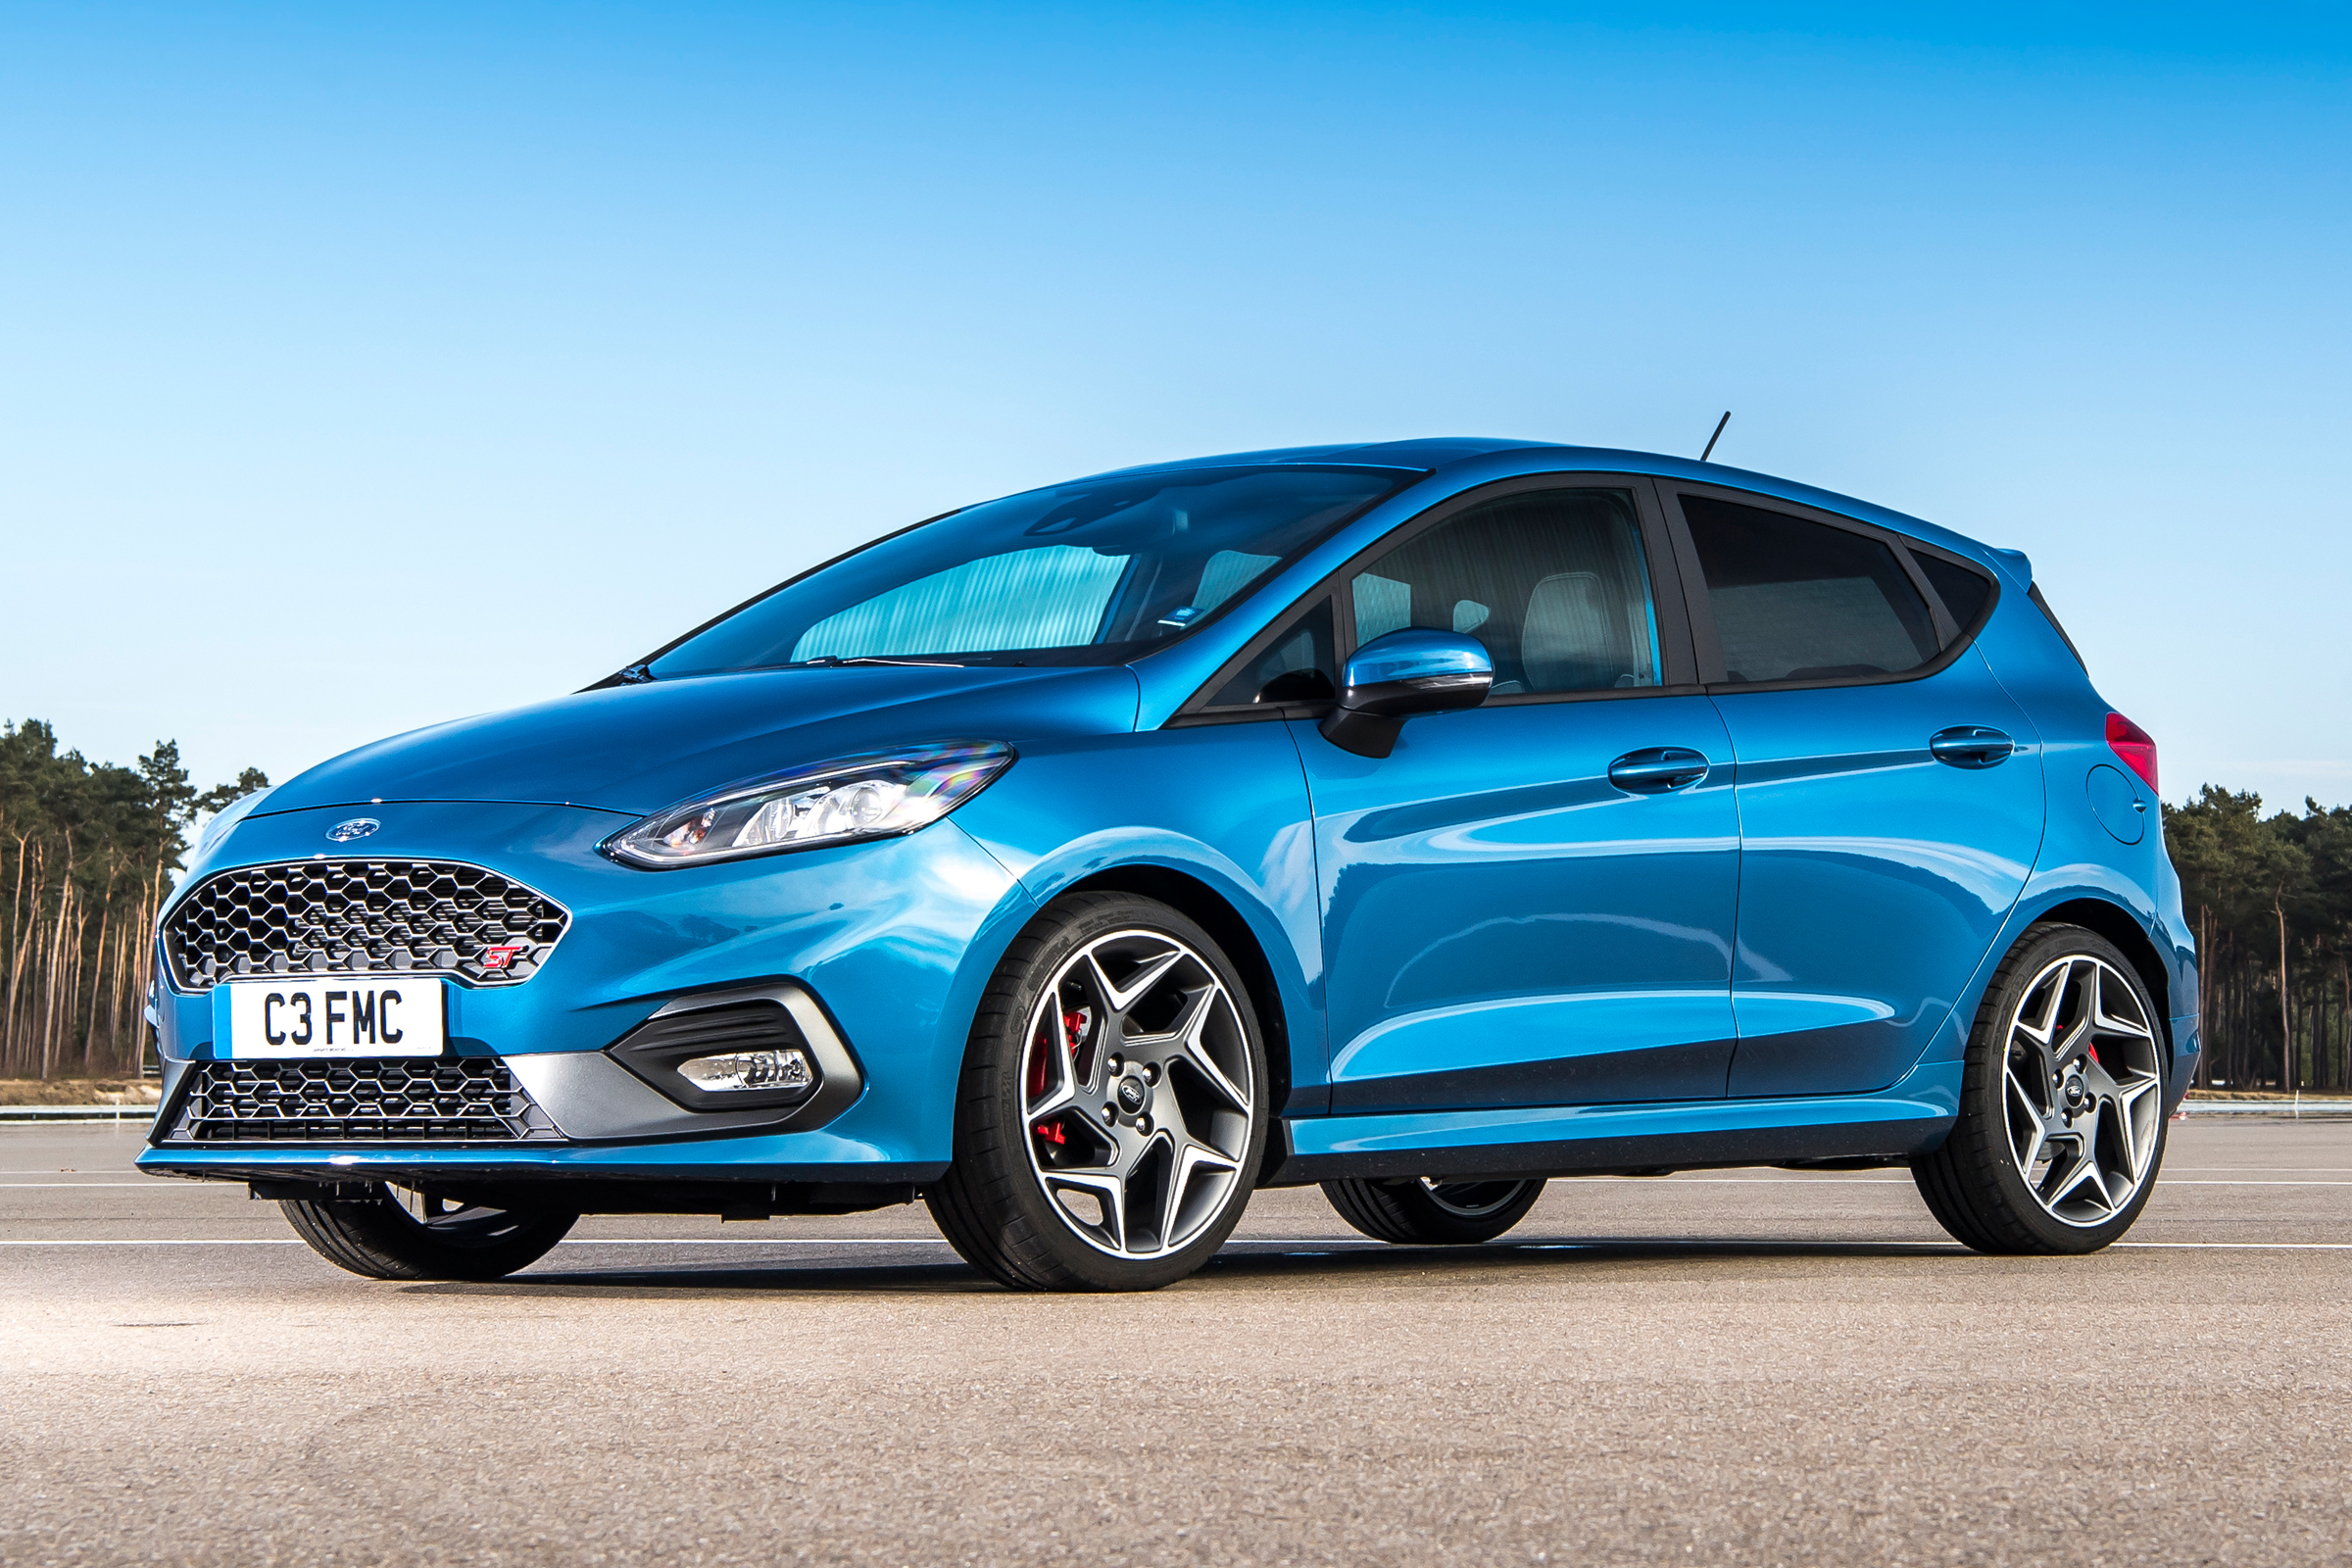 new-2018-ford-fiesta-st-has-197bhp-and-track-mode-carbuyer